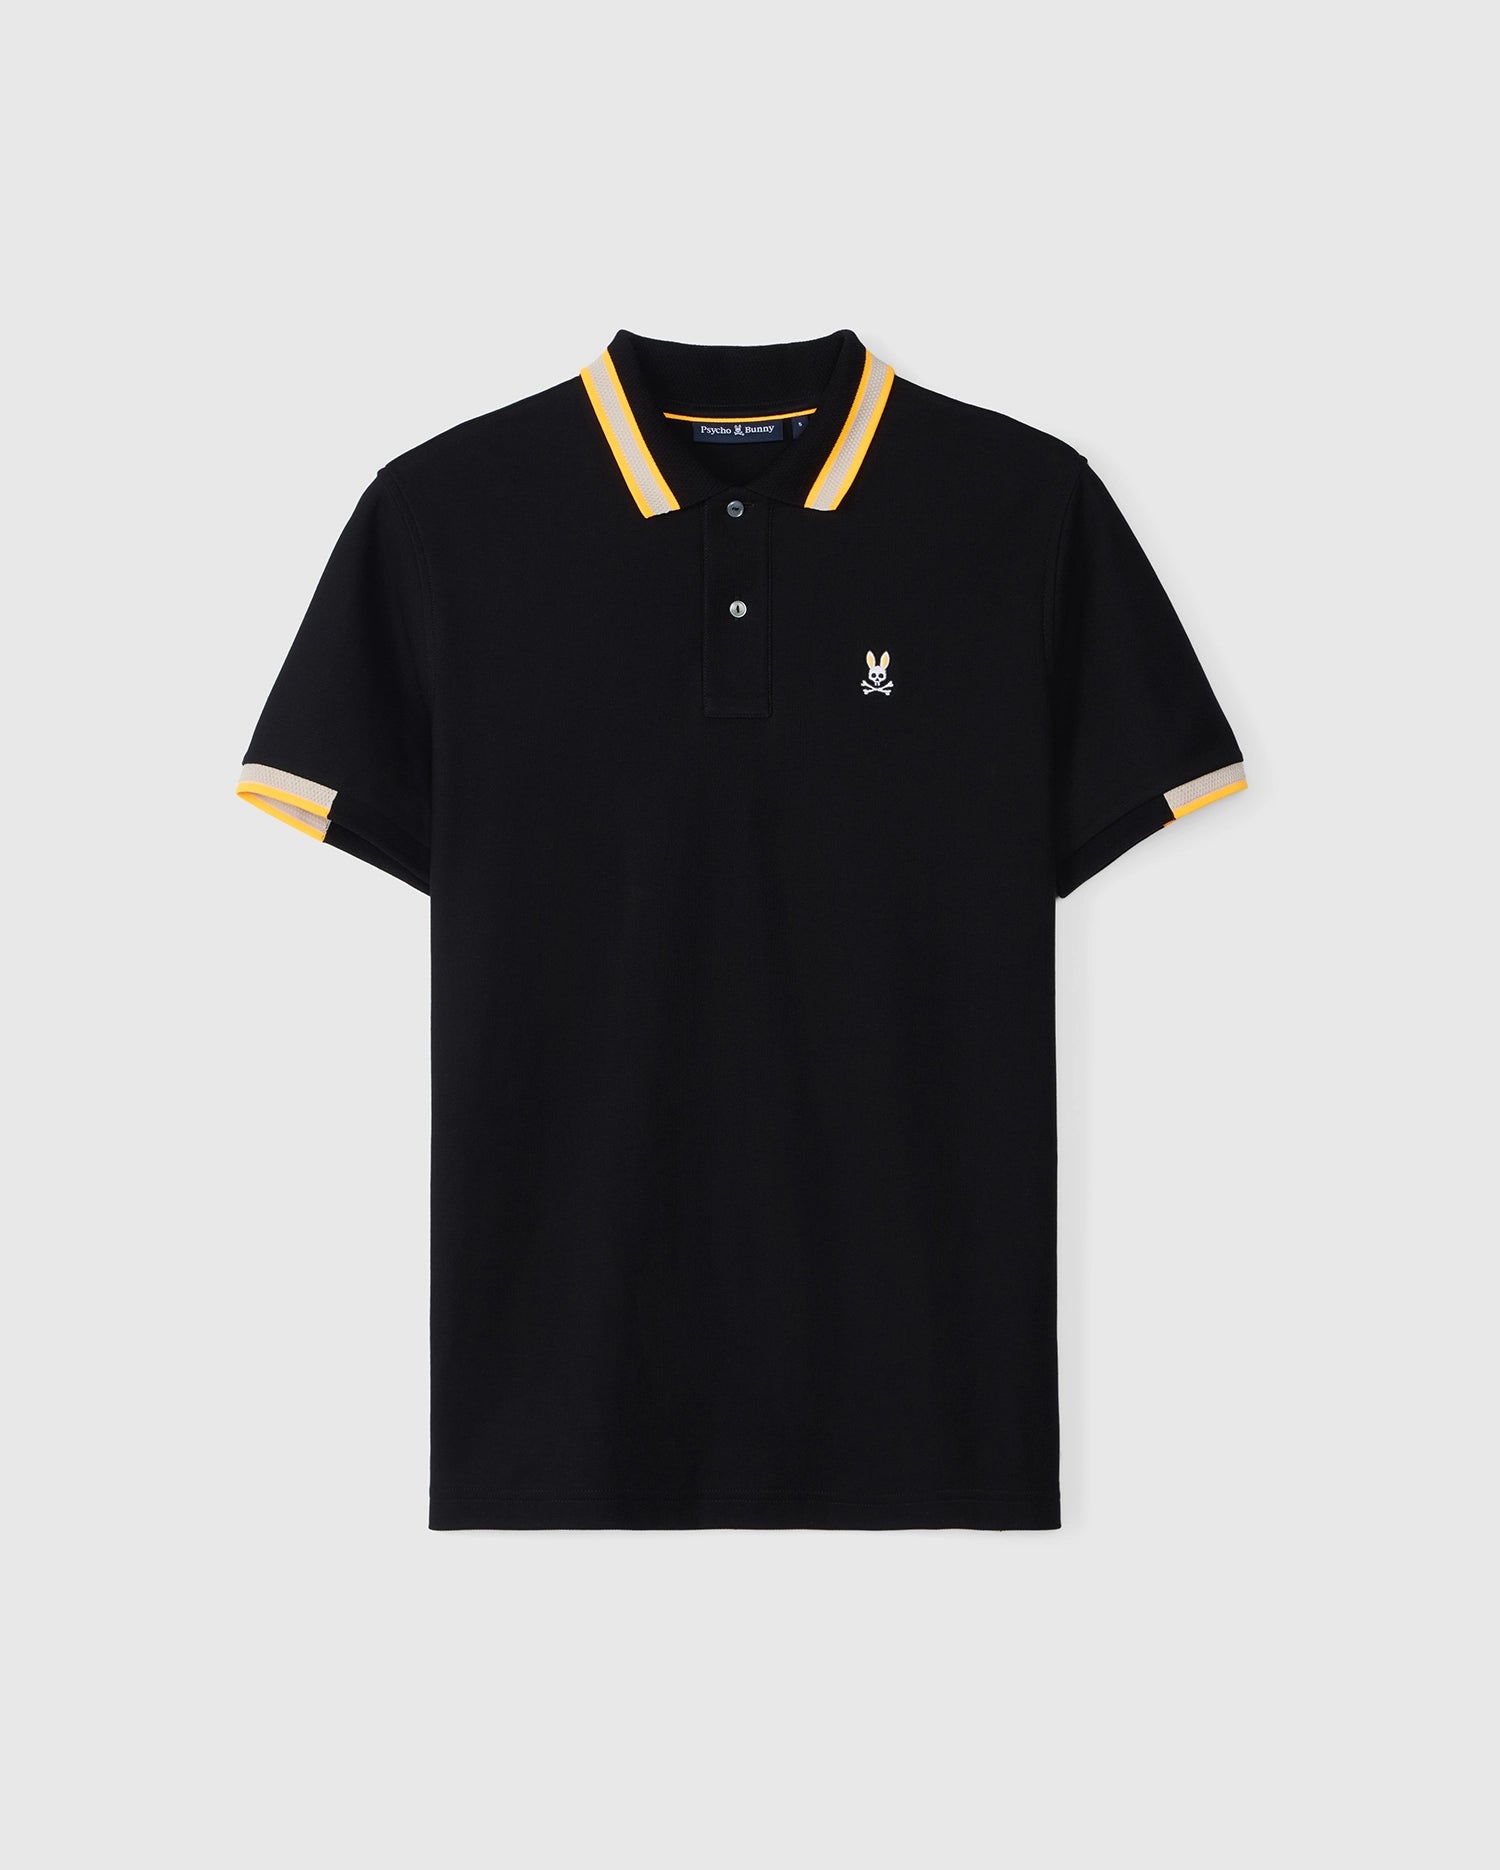 A black MENS WOODSTOCK PIQUE POLO SHIRT with textured-knit collar and yellow trim on the sleeves, featuring a small white embroidered Psycho Bunny logo on the left chest, displayed against a plain background.